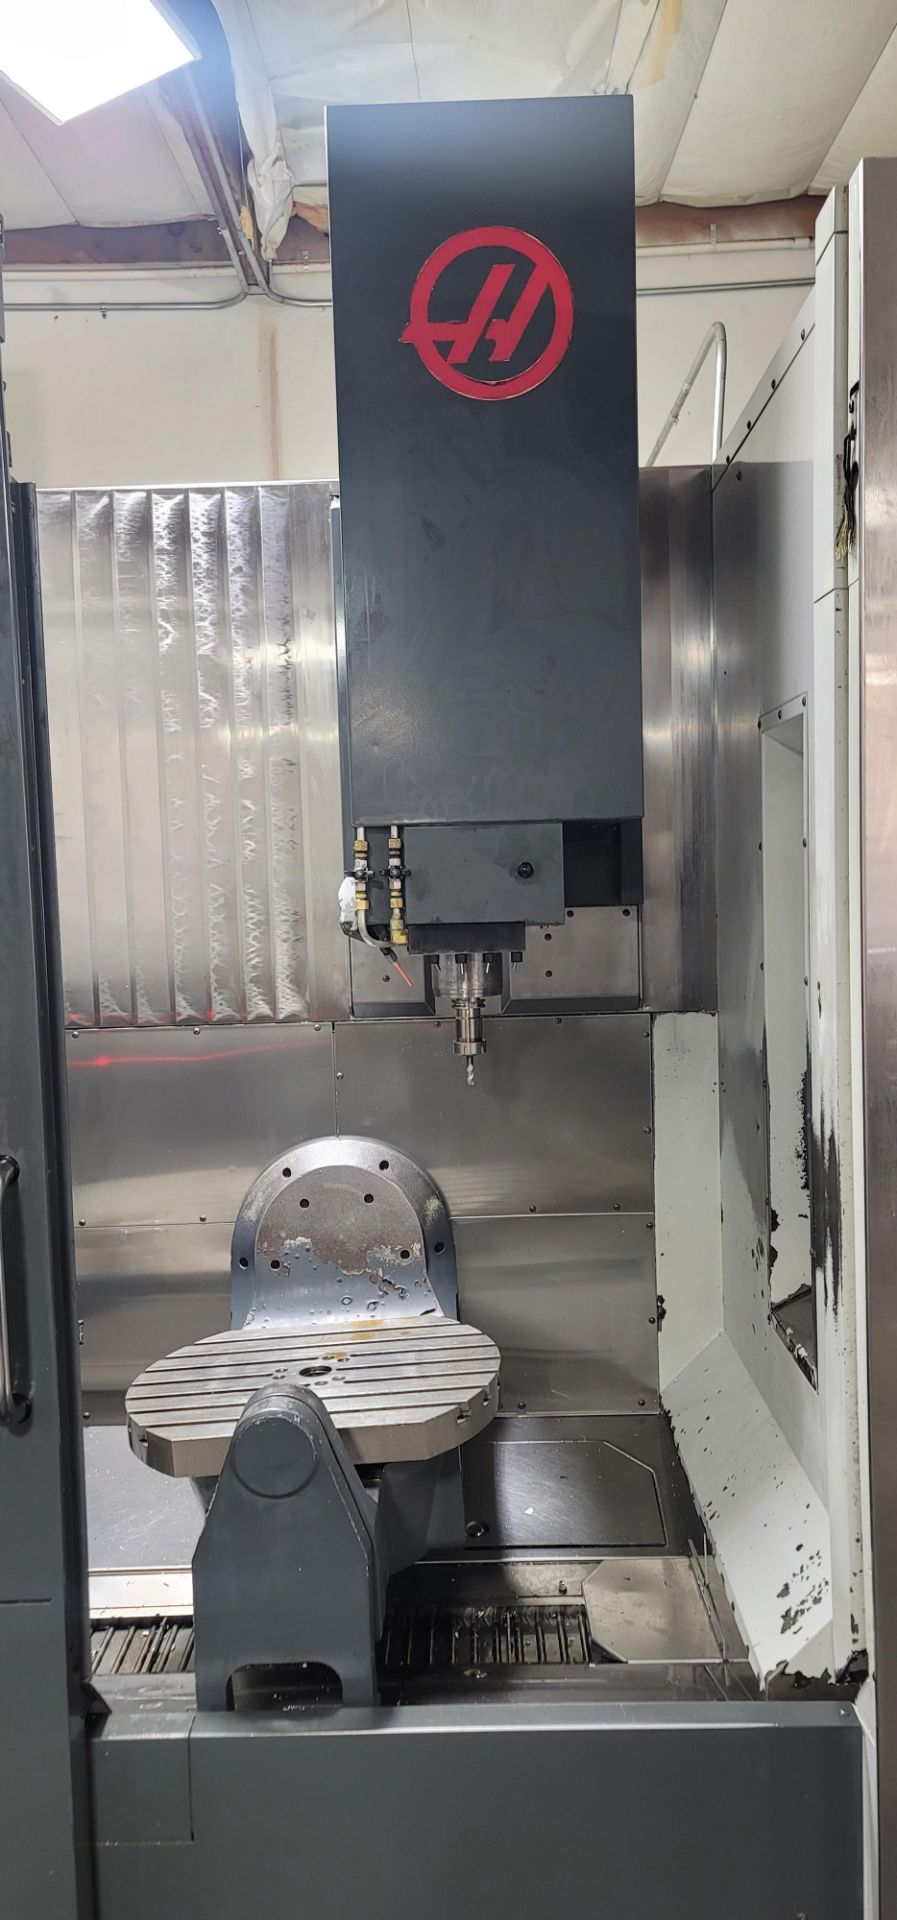 2016 HAAS UMC-750 5-Axis 12,000 rpm CNC Vertical Machining Center - Image 5 of 16